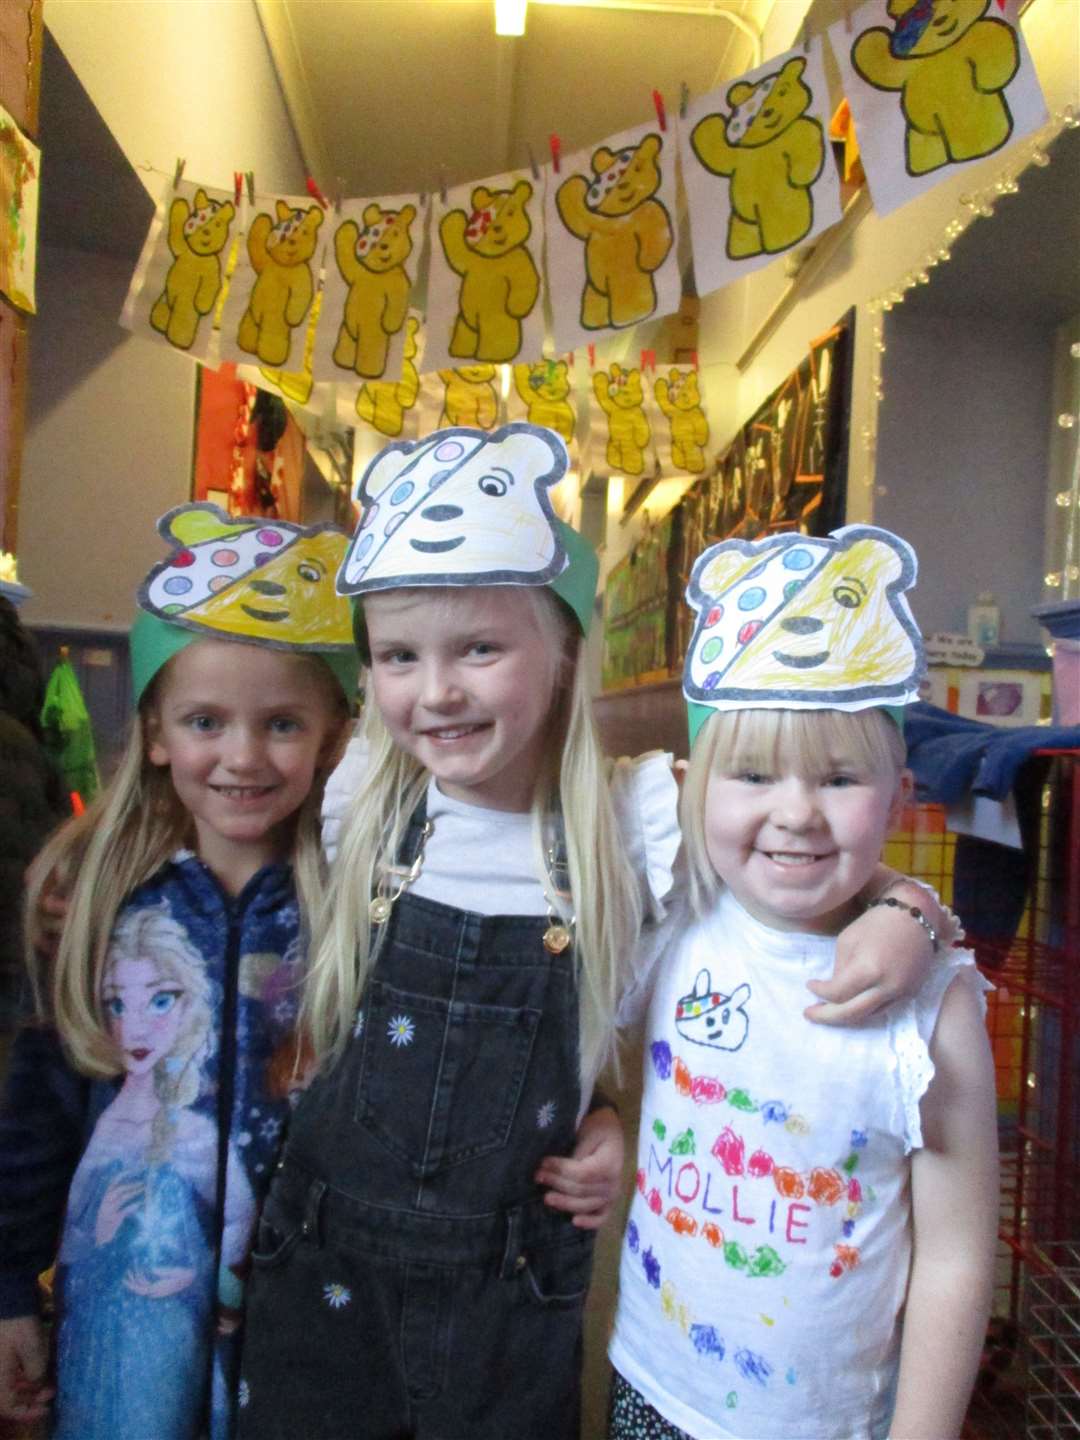 Friends with their Pudsey masks.